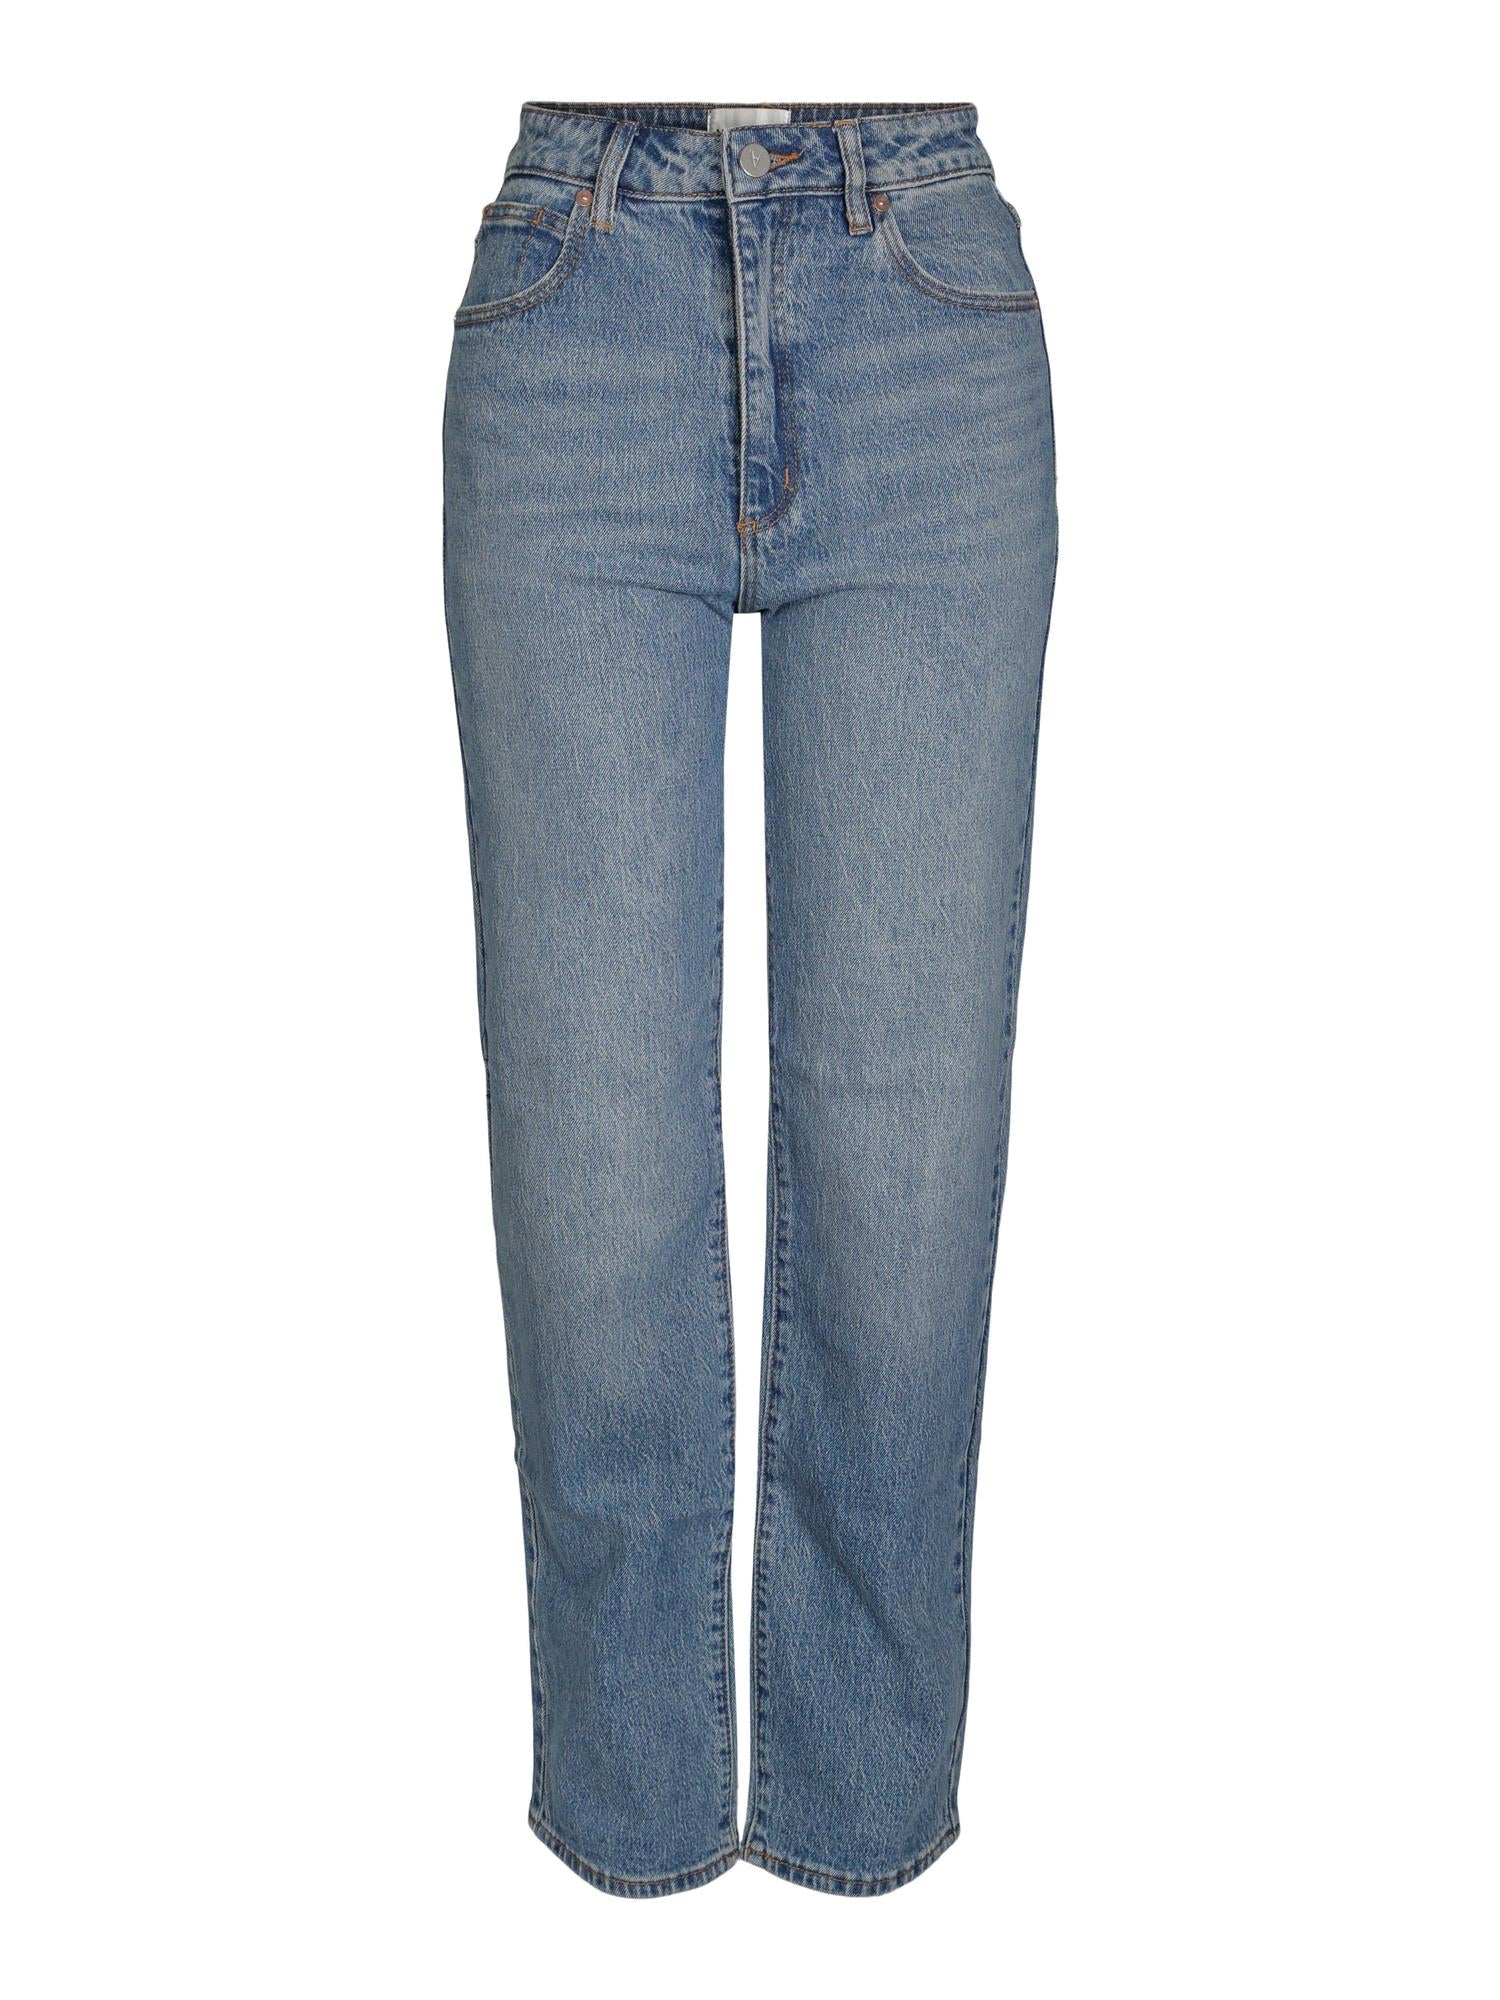 A-BRAND jeans Erin (7095911973061)